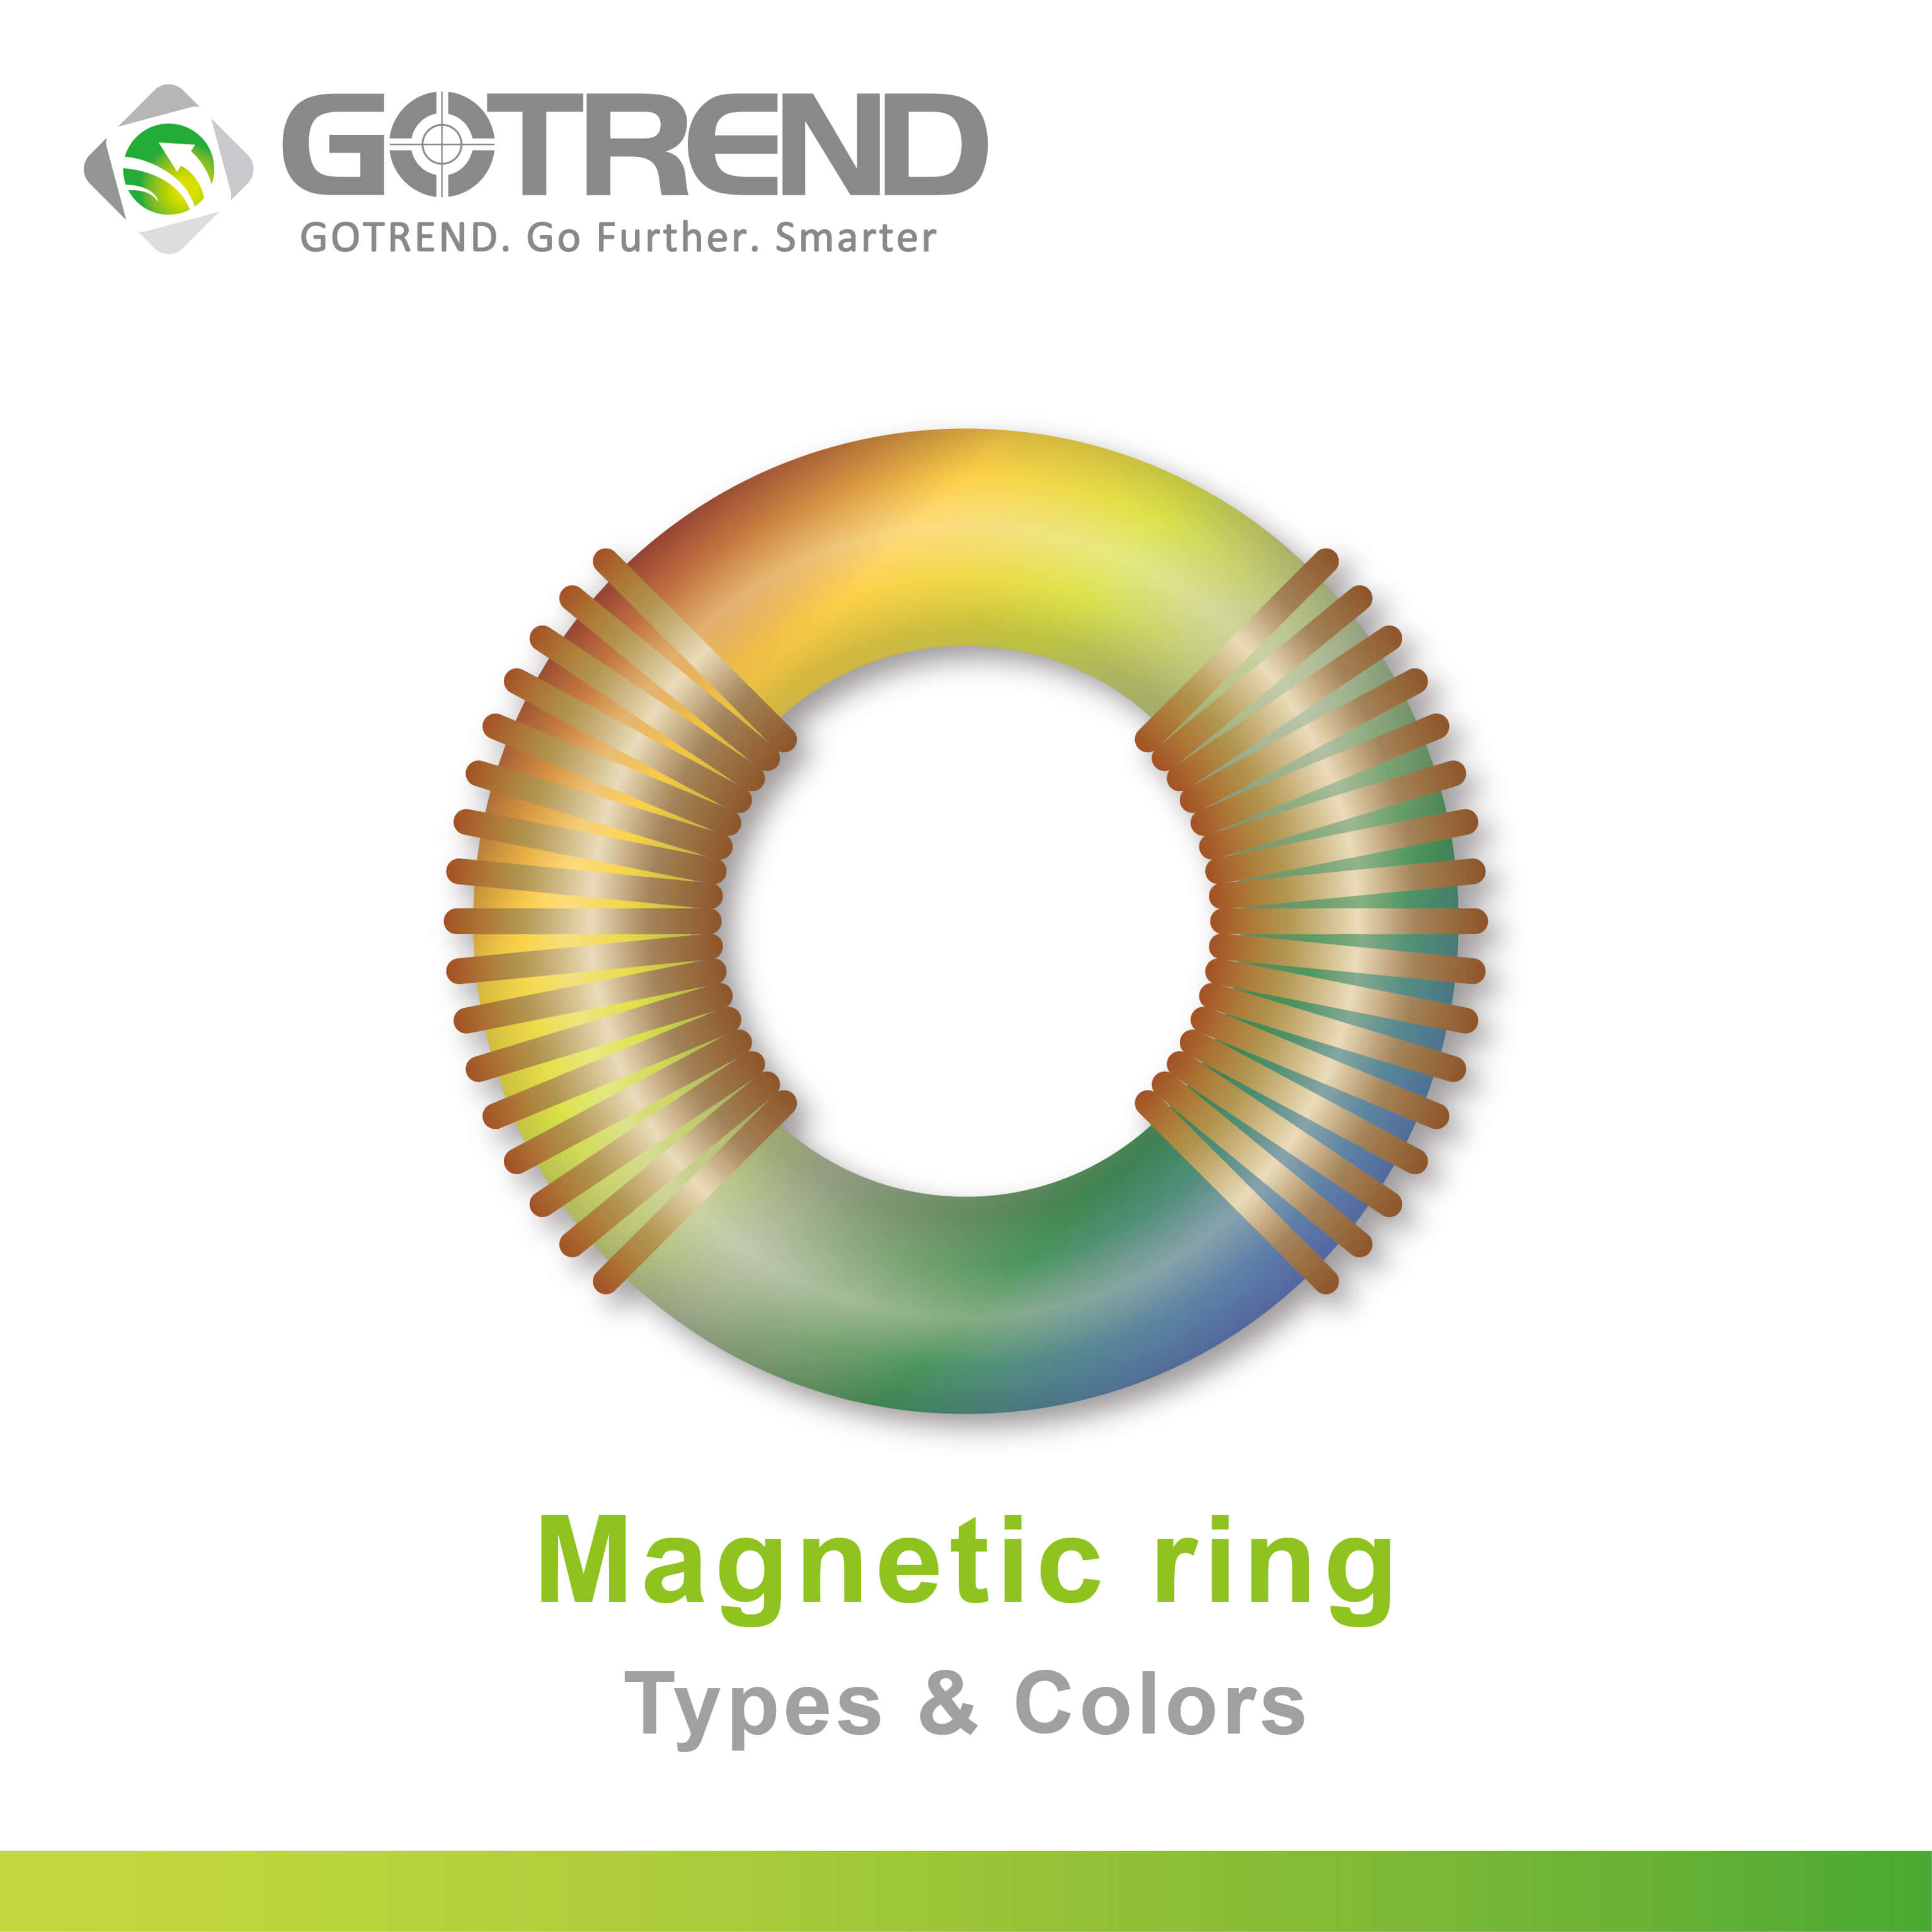 GOTREND Article-What does the color of the inductor ring mean?